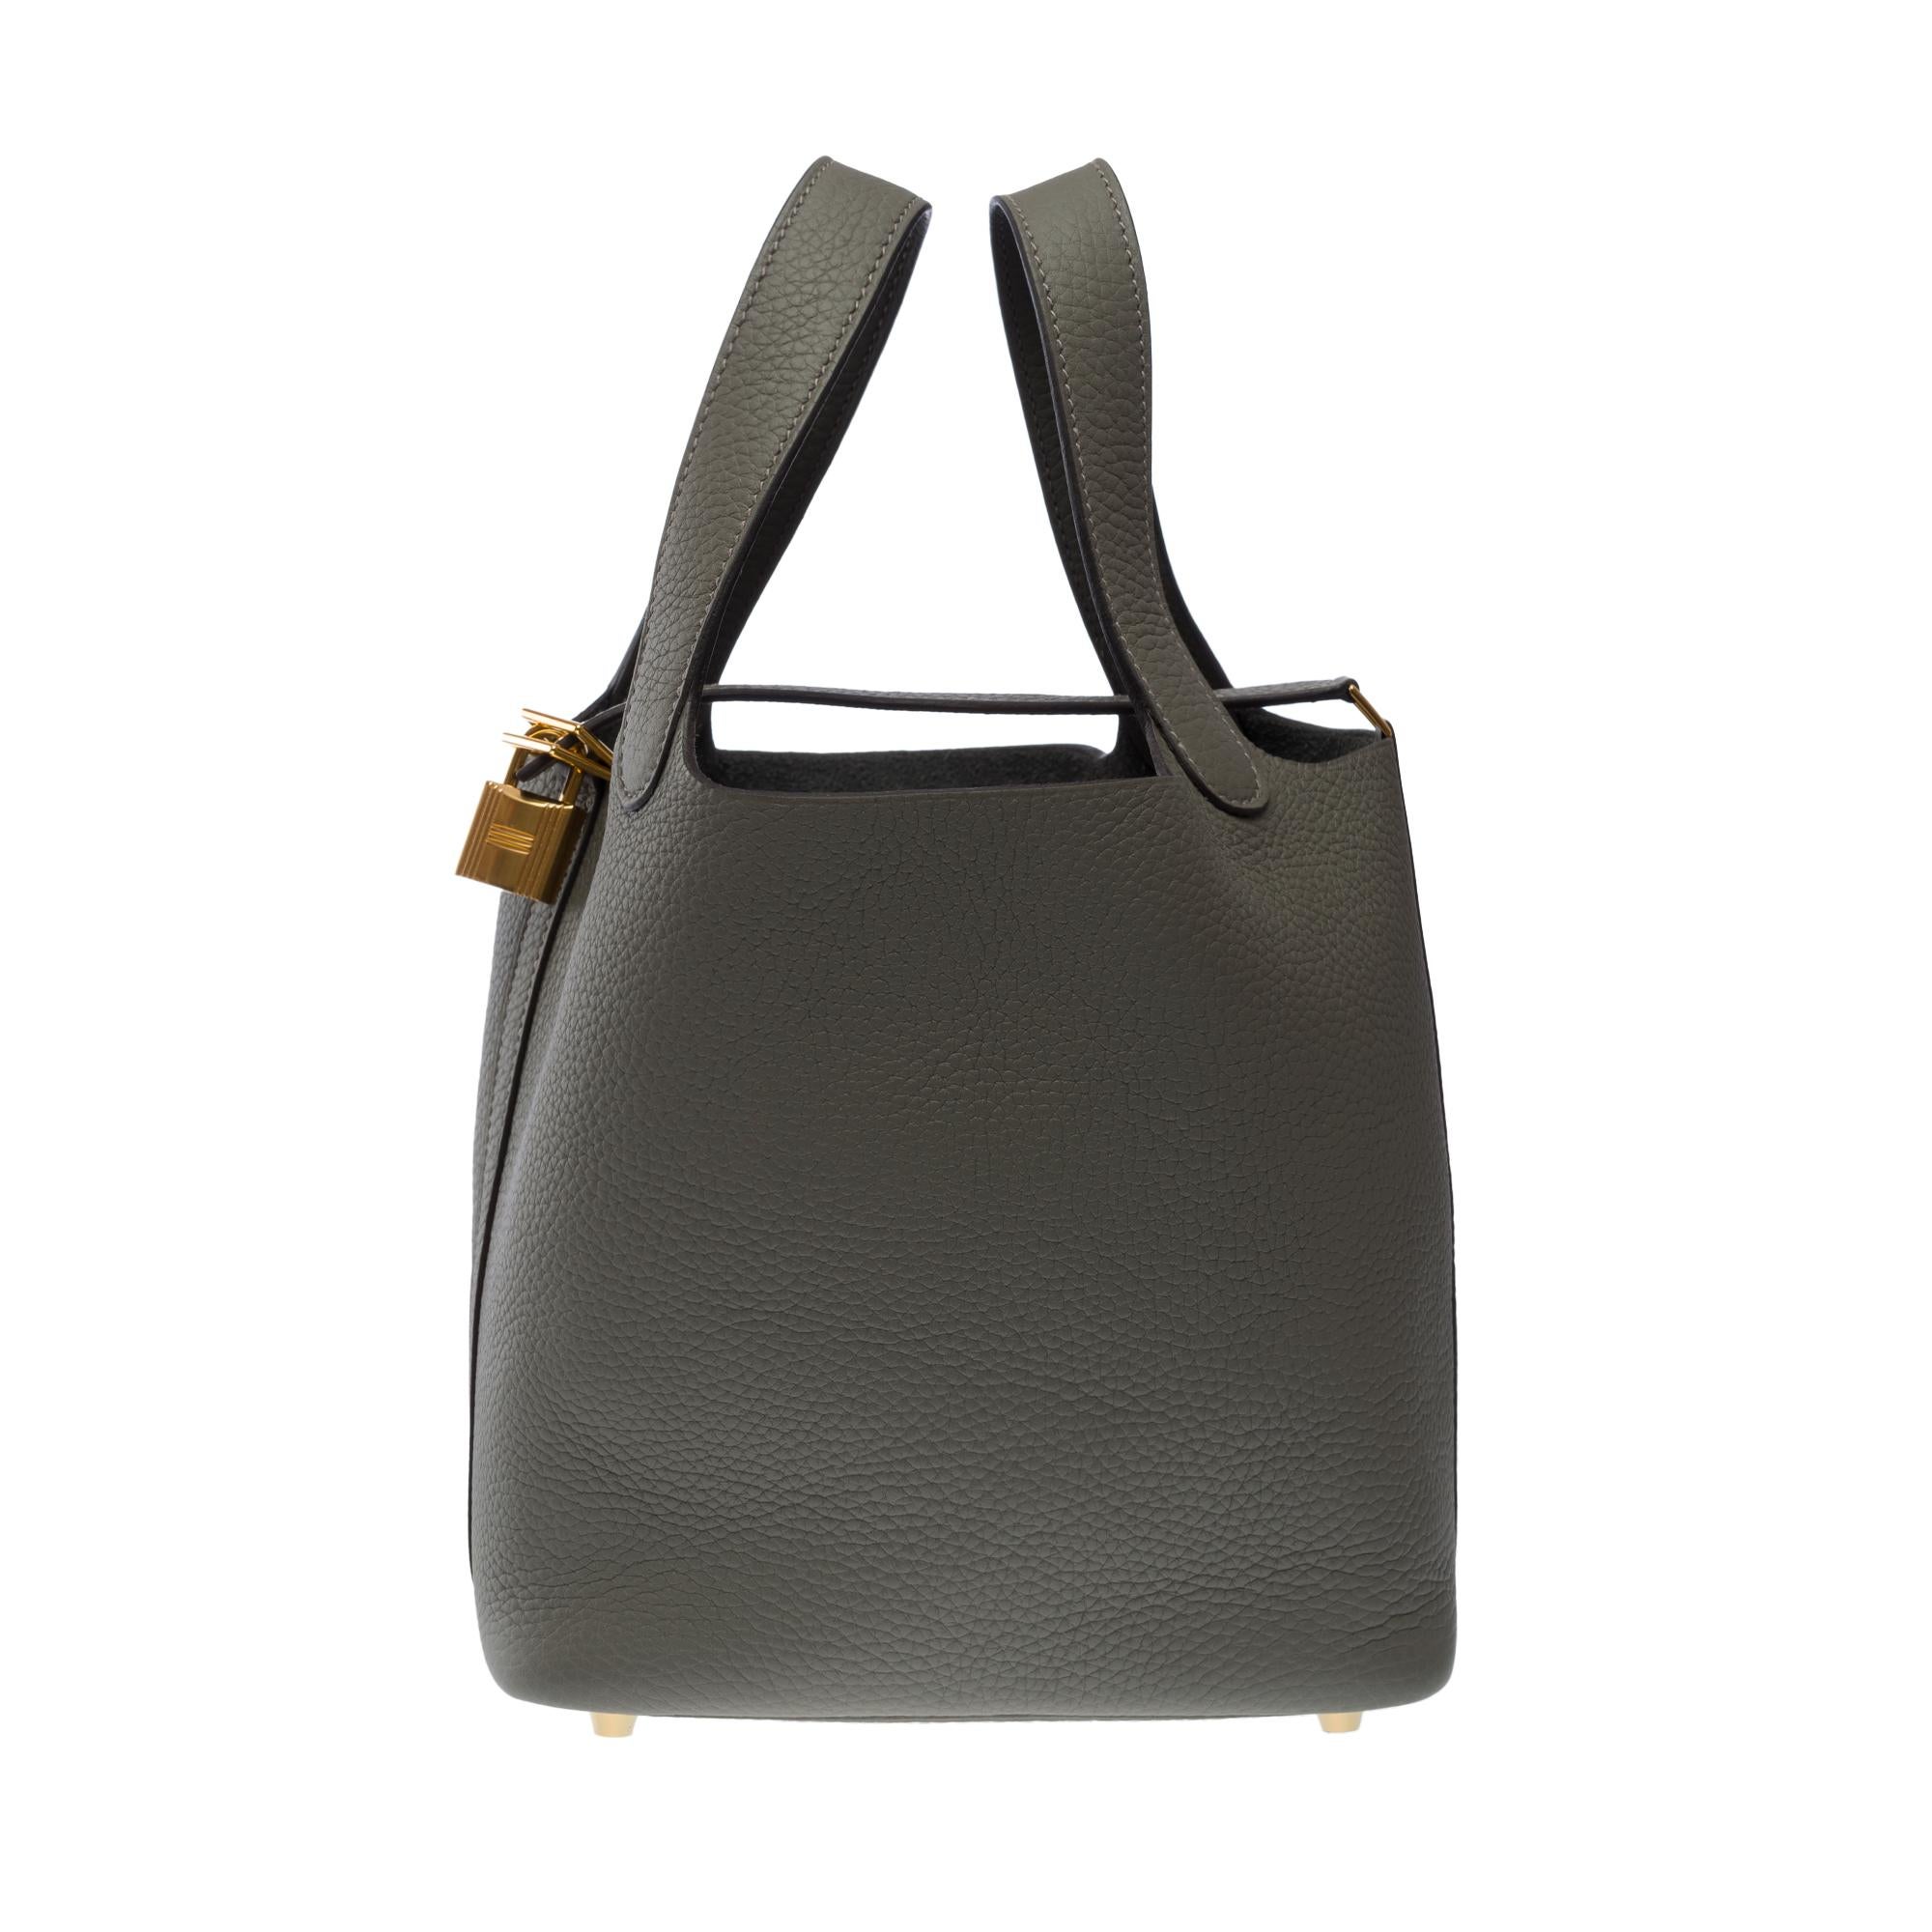 Charming​ ​Hermes​ ​Picotin​ ​18​ ​in Gris​ ​Meyer​ ​Taurillon​ ​Clémence​ ​leather,​ ​gold-plated​ ​metal​ ​hardware,​ ​double​ ​handle​ ​in​ ​gray​ ​leather​ ​allowing​ ​a​ ​hand​ ​carry

Closure​ ​by​ ​leather​ ​tab
Grey​ ​suede​